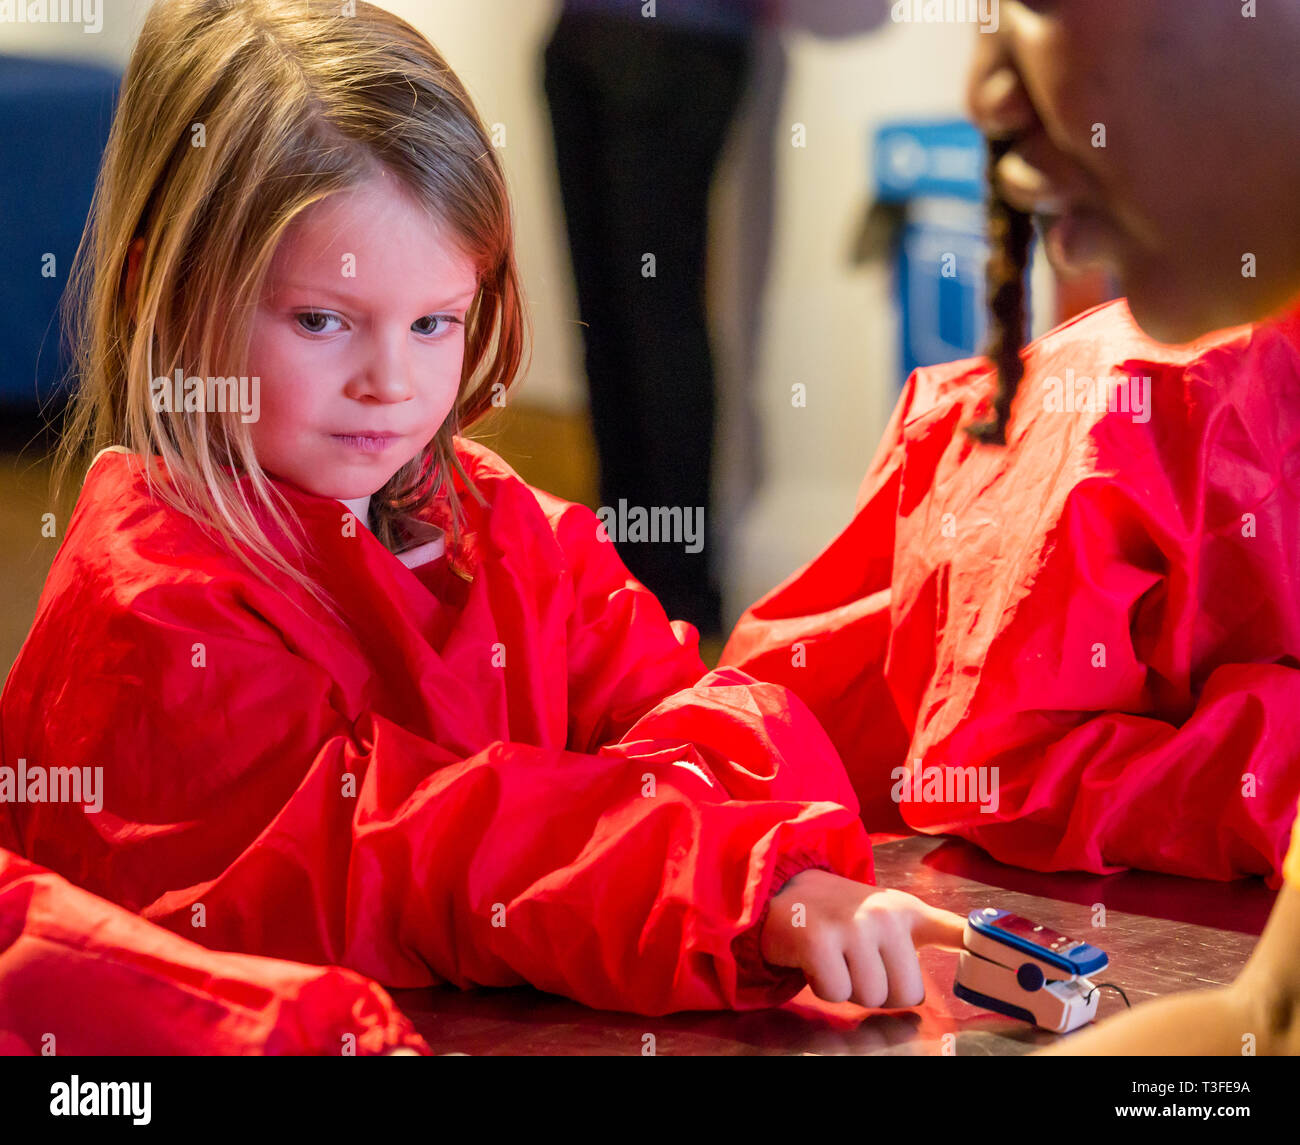 City Arts Centre, Edinburgh, Scotland, United Kingdom, 9 April 2019. Edinburgh Science Festival:  Evie, age 6 years, has fun learning about blood at the Blood Bar drop in event at the Science Festival Stock Photo